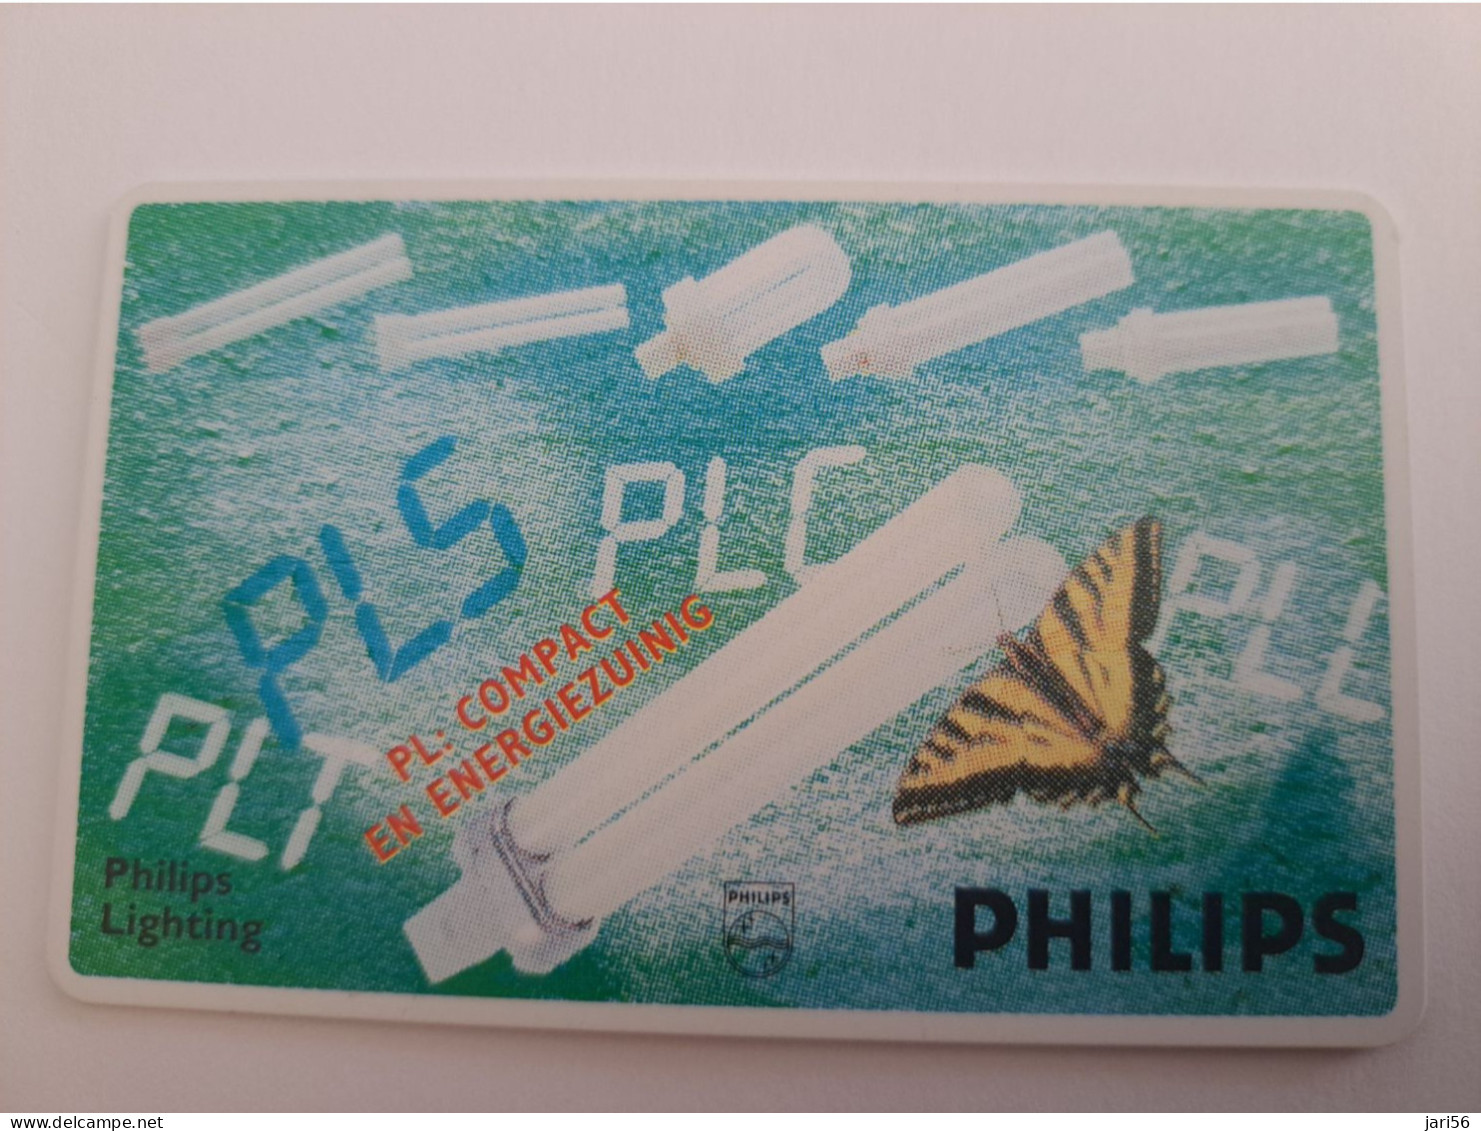 NETHERLANDS  ADVERTISING CHIPCARD HFL 5,00   CRE 036   PHILIPPS PLS/LIGHTNING          MINT   ** 14371** - Private